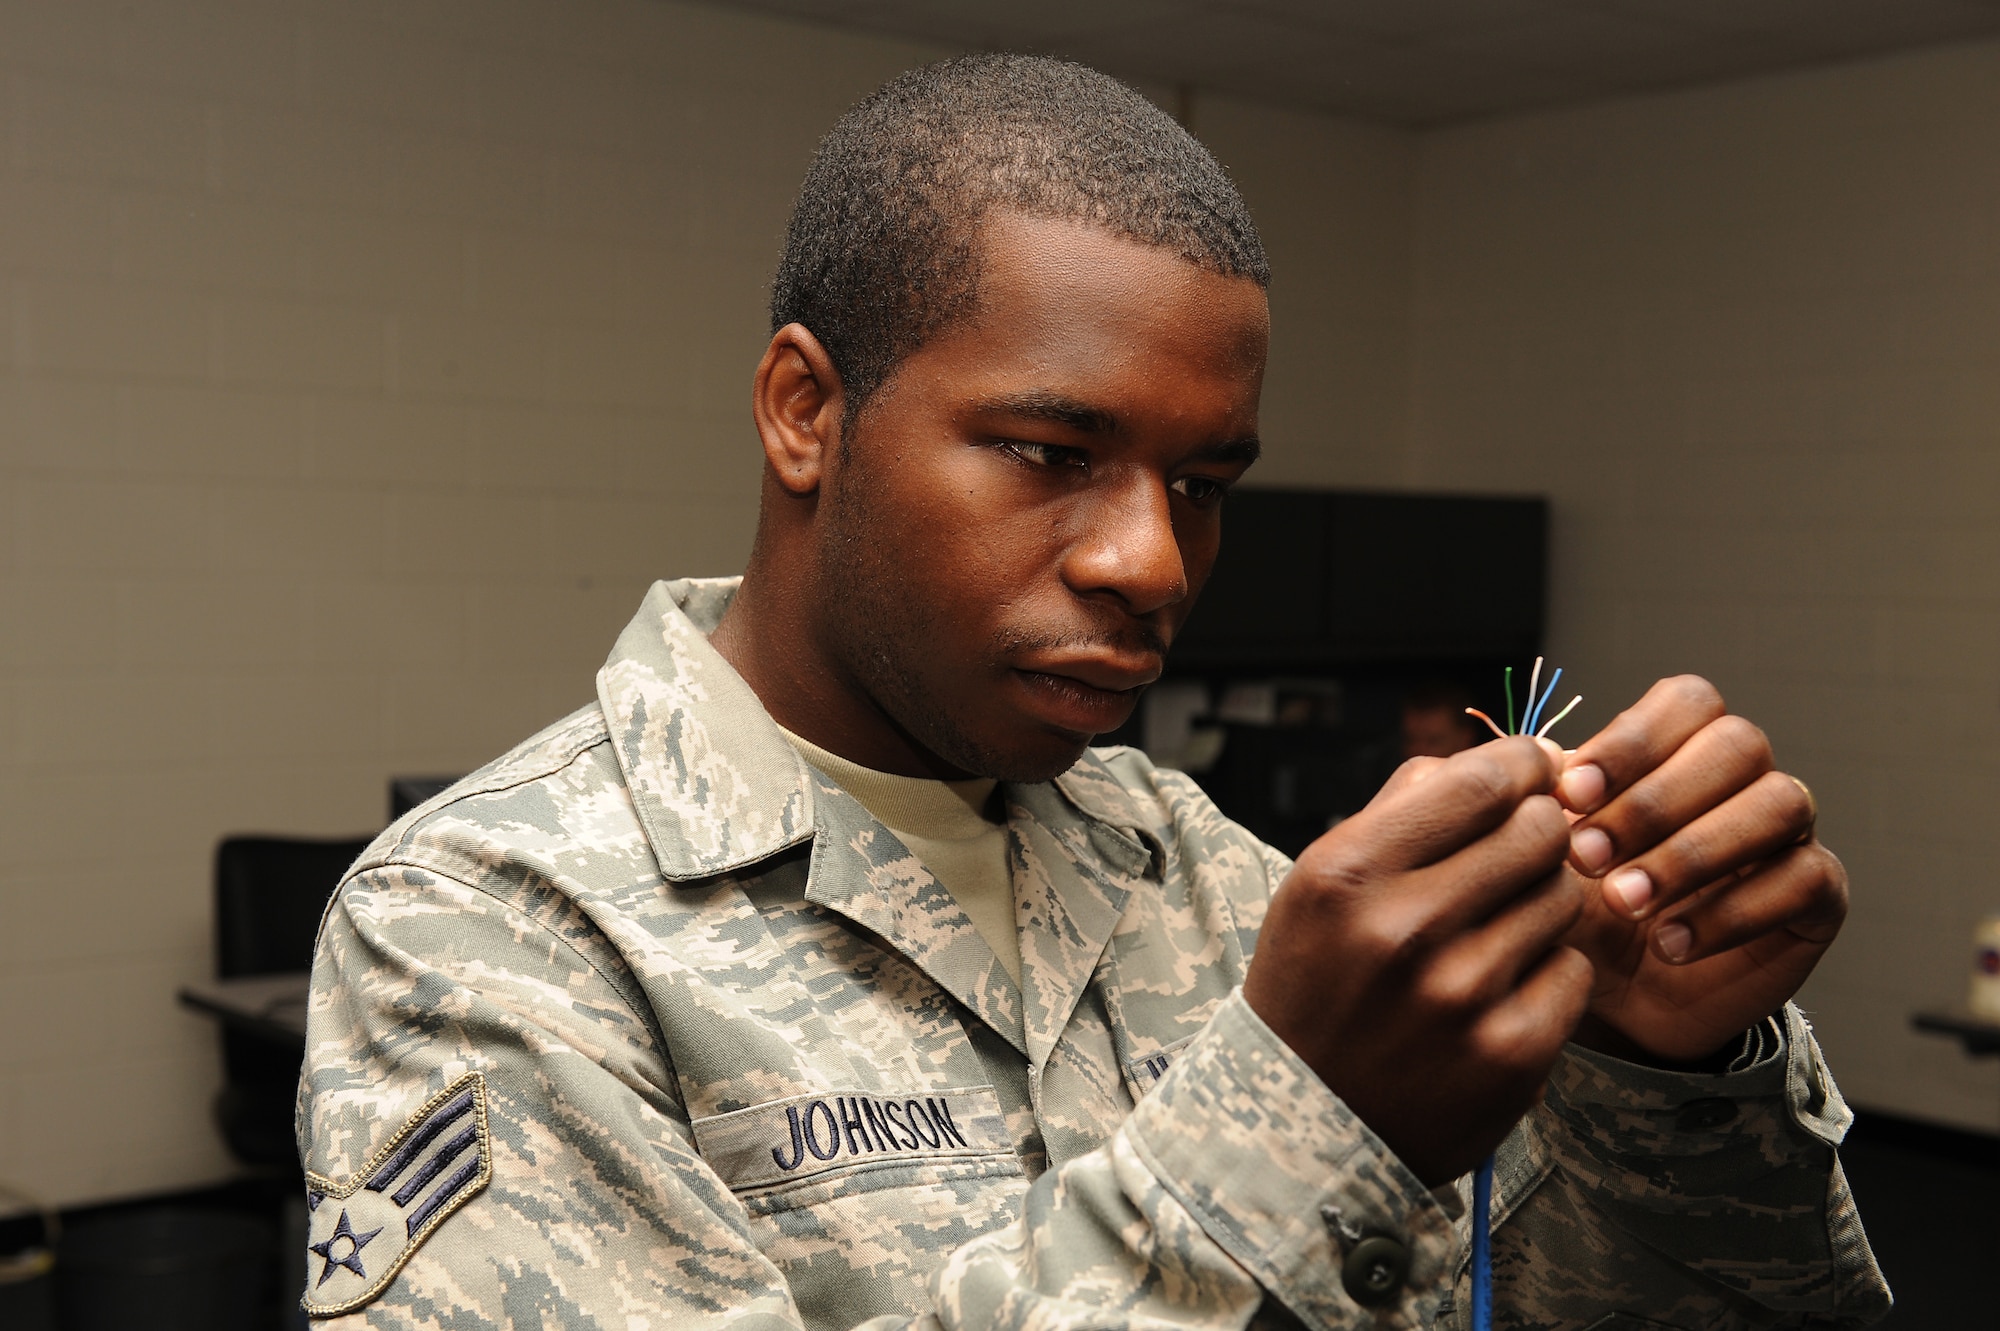 Senior Airman Nathaniel Johnson III, 4th Communications Squadron client support administrator, places local area network cable wires in the proper order to allow computers to connect to the base network on Seymour Johnson Air Force Base, N.C., Oct. 1, 2009. Airman Johnson travels to every office on base solving printer, digital sender, computer, Microsoft program and LAN cable problems.  (U.S. Air Force photo/Airman 1st Class Whitney Lambert)